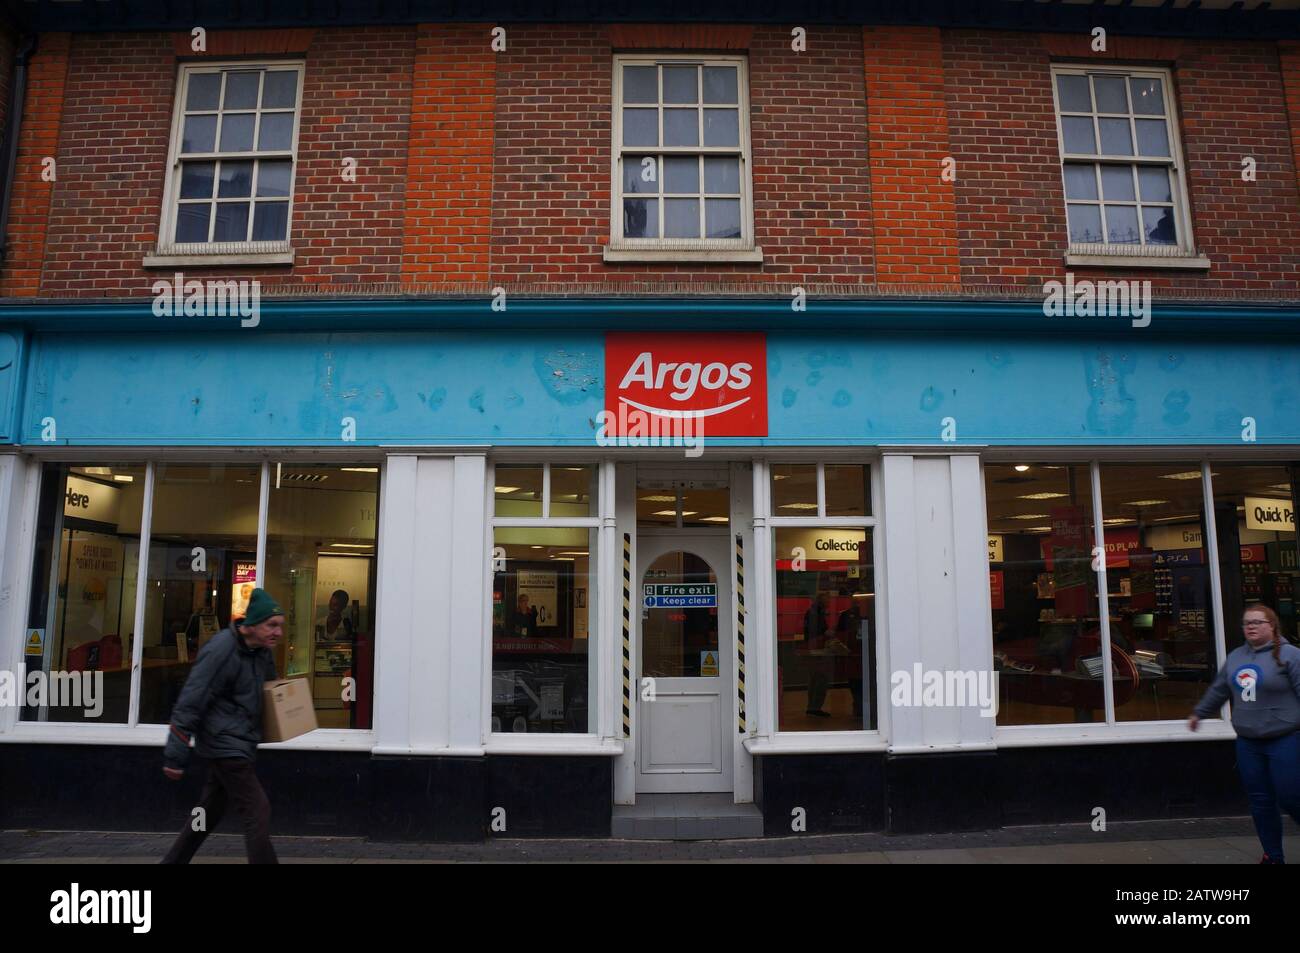 Argos outlet is one of the store chains 